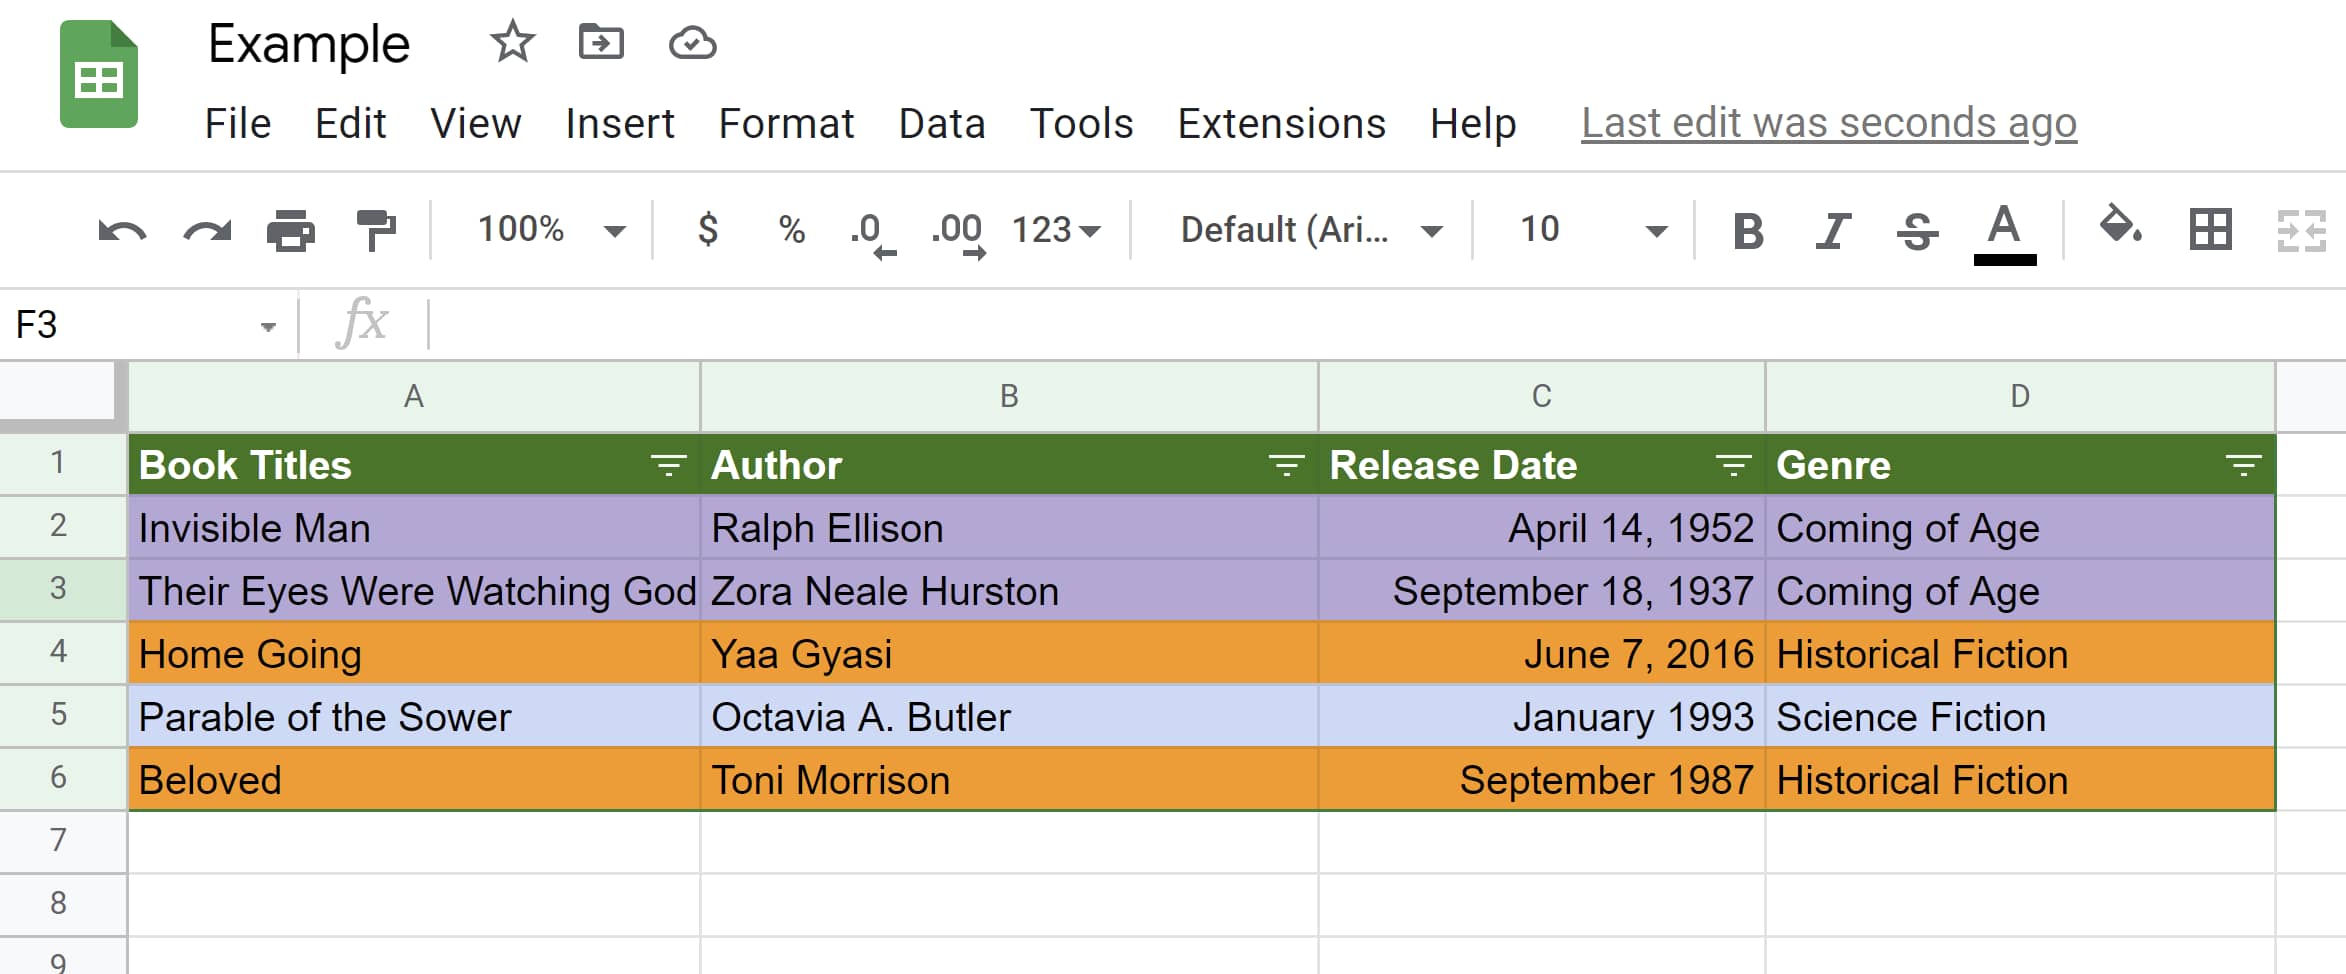 Data encoded in purple is sorted at the top of Google Spreadsheets